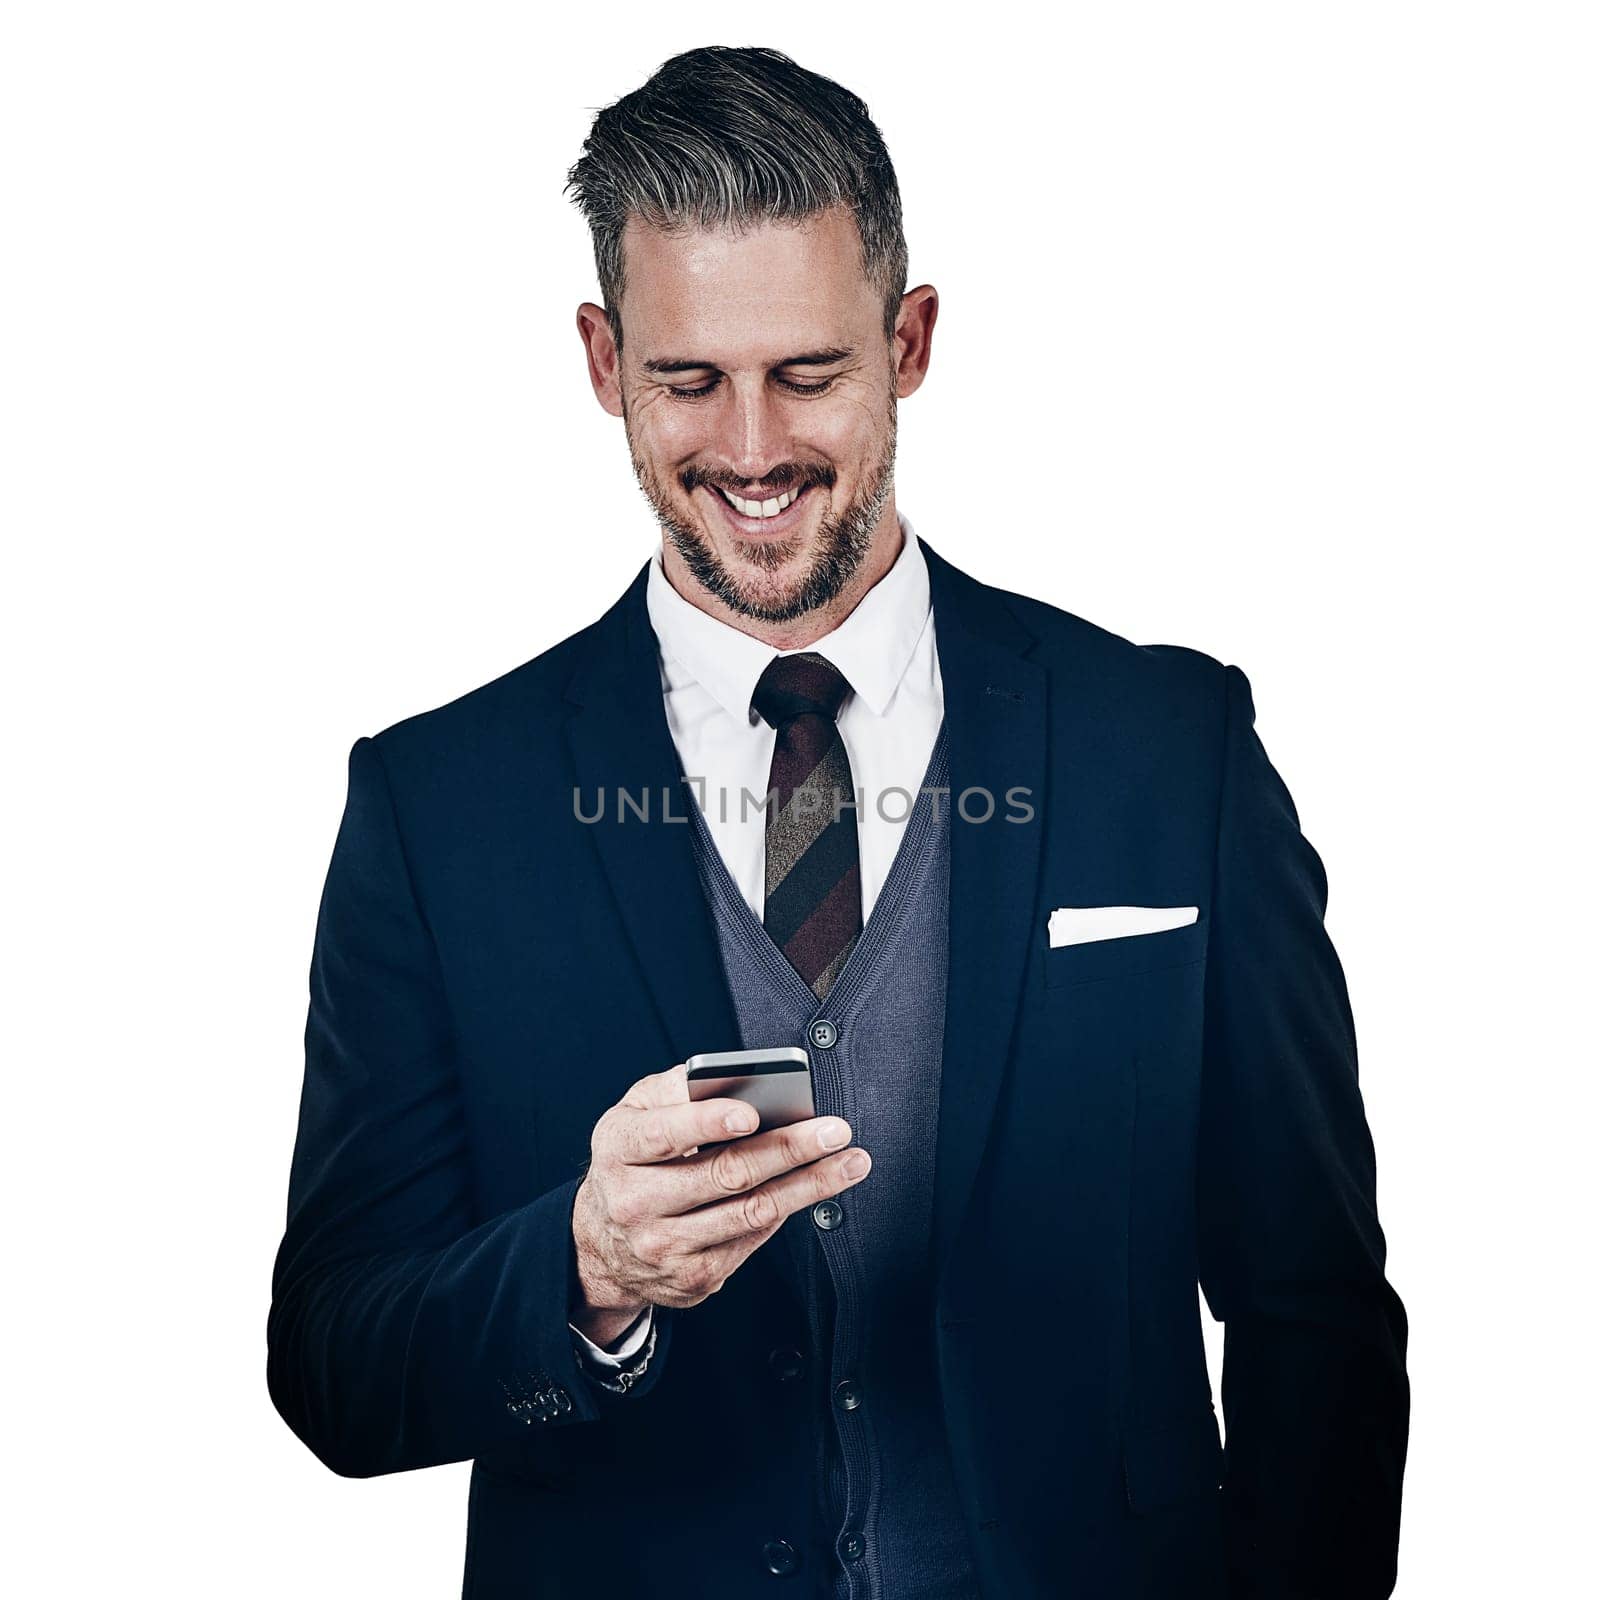 Good news sent right to his phone. Studio shot of a businessman using a mobile phone against a white background